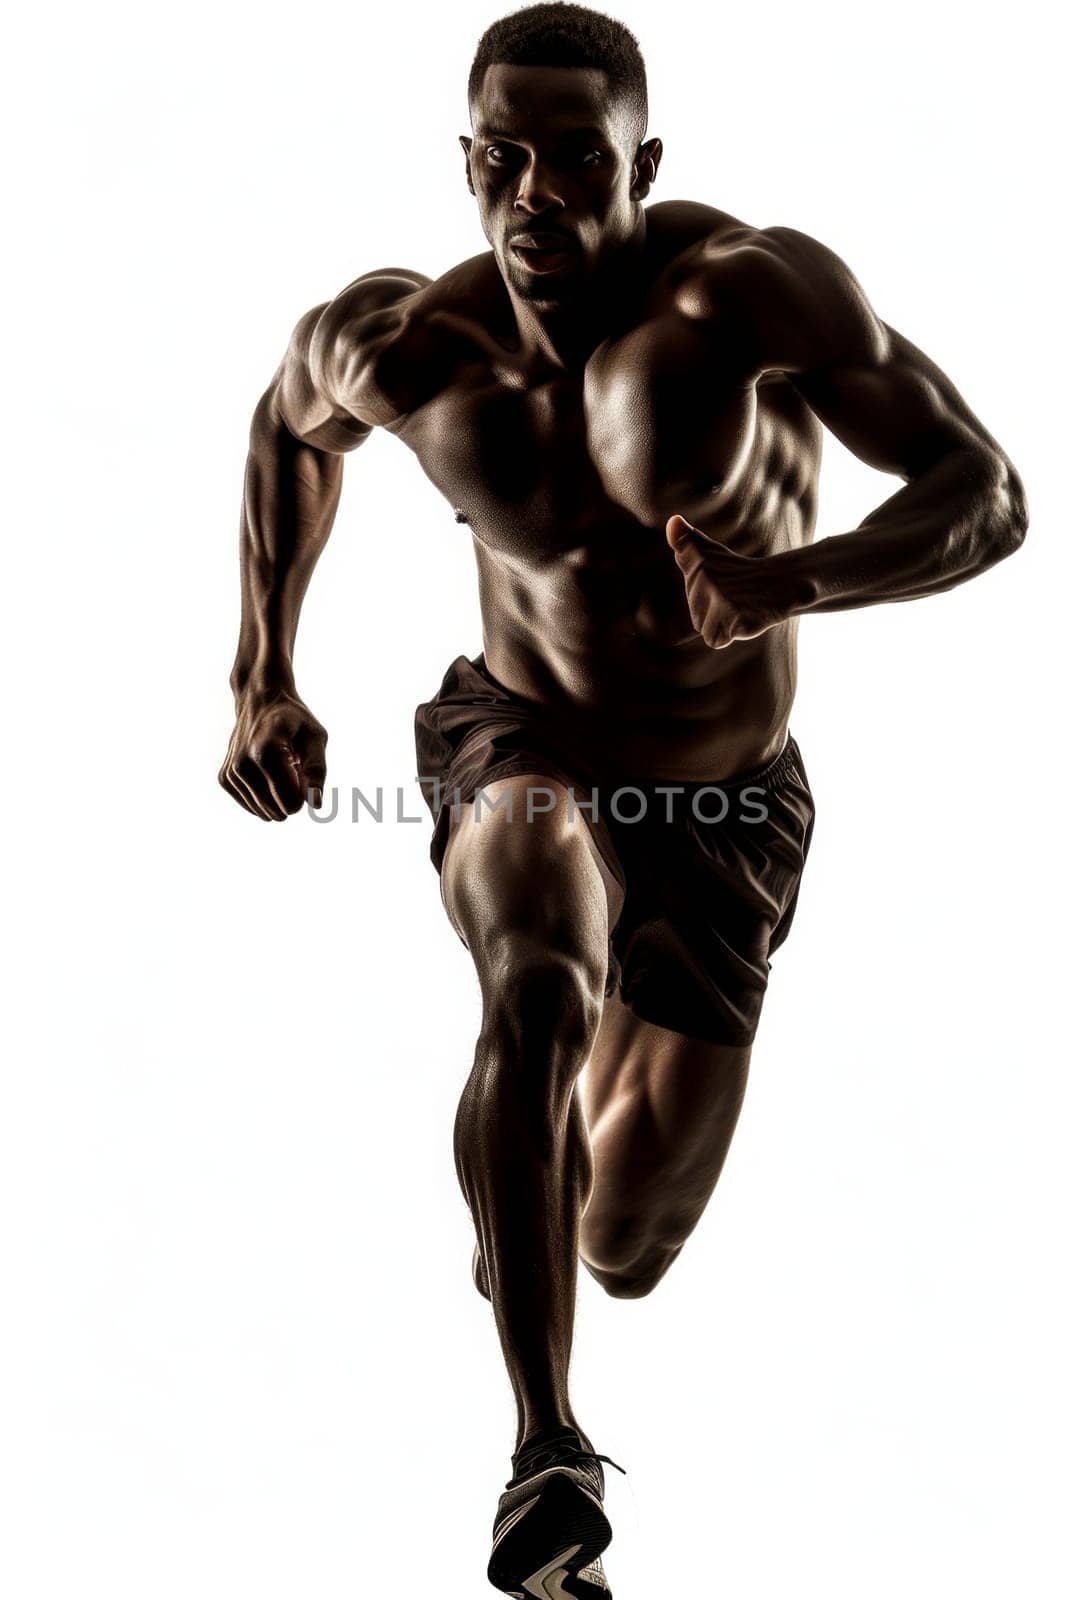 front view of athlete running isolated on white background.